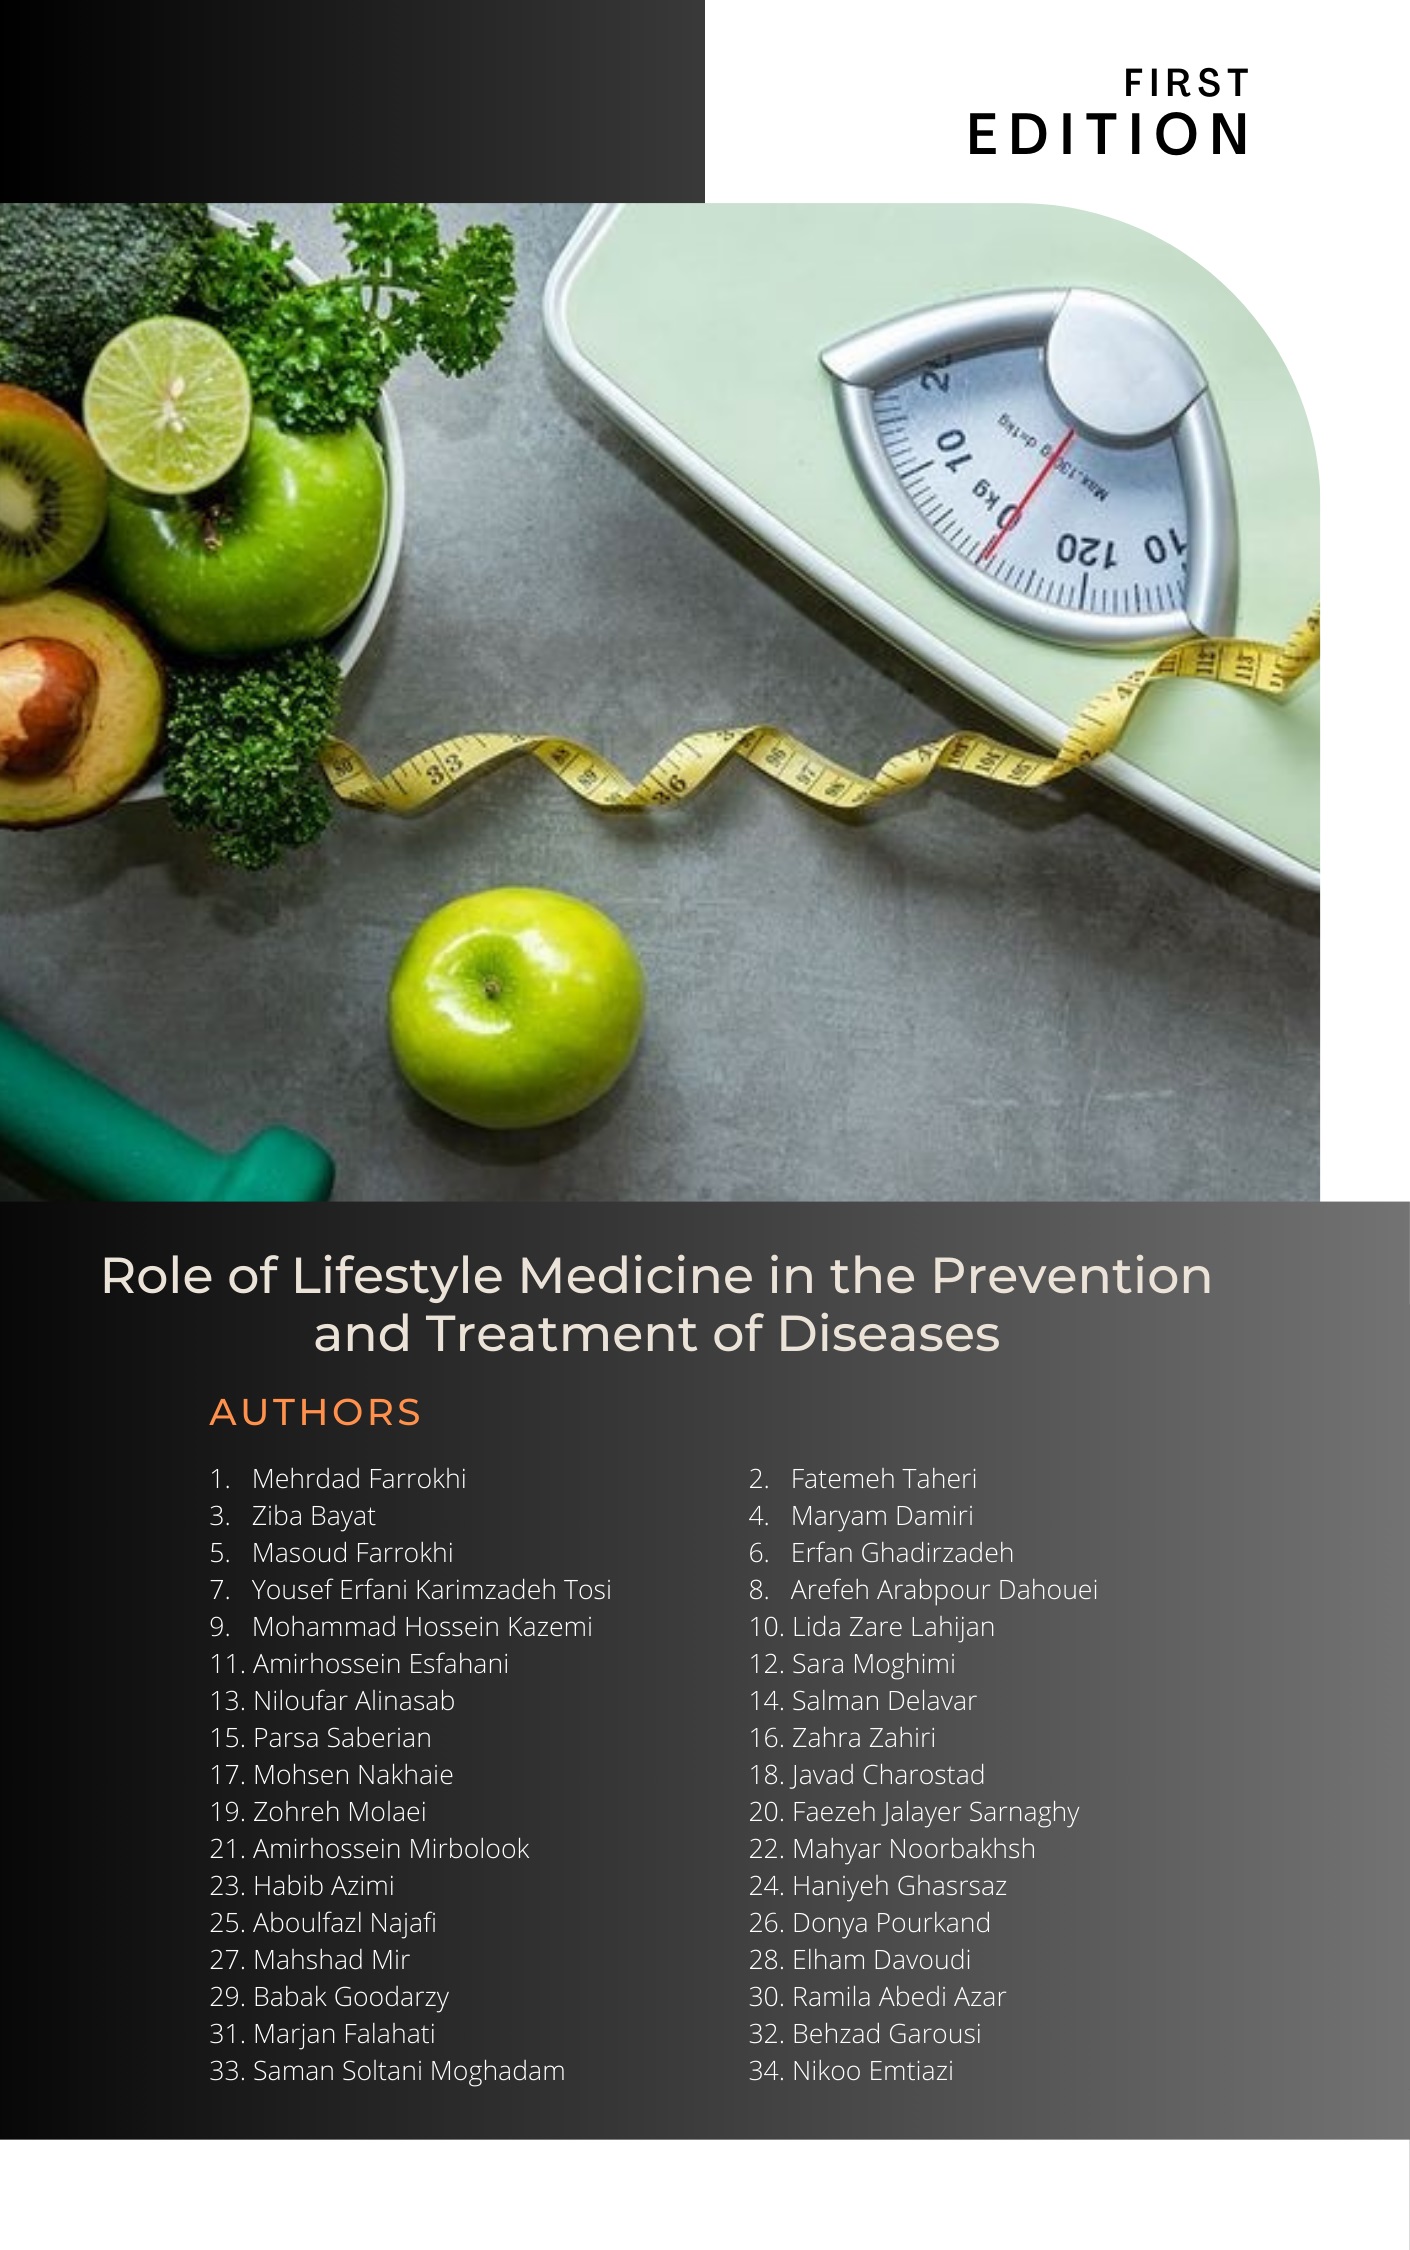 Role of Lifestyle Medicine in the Prevention and Treatment of Diseases